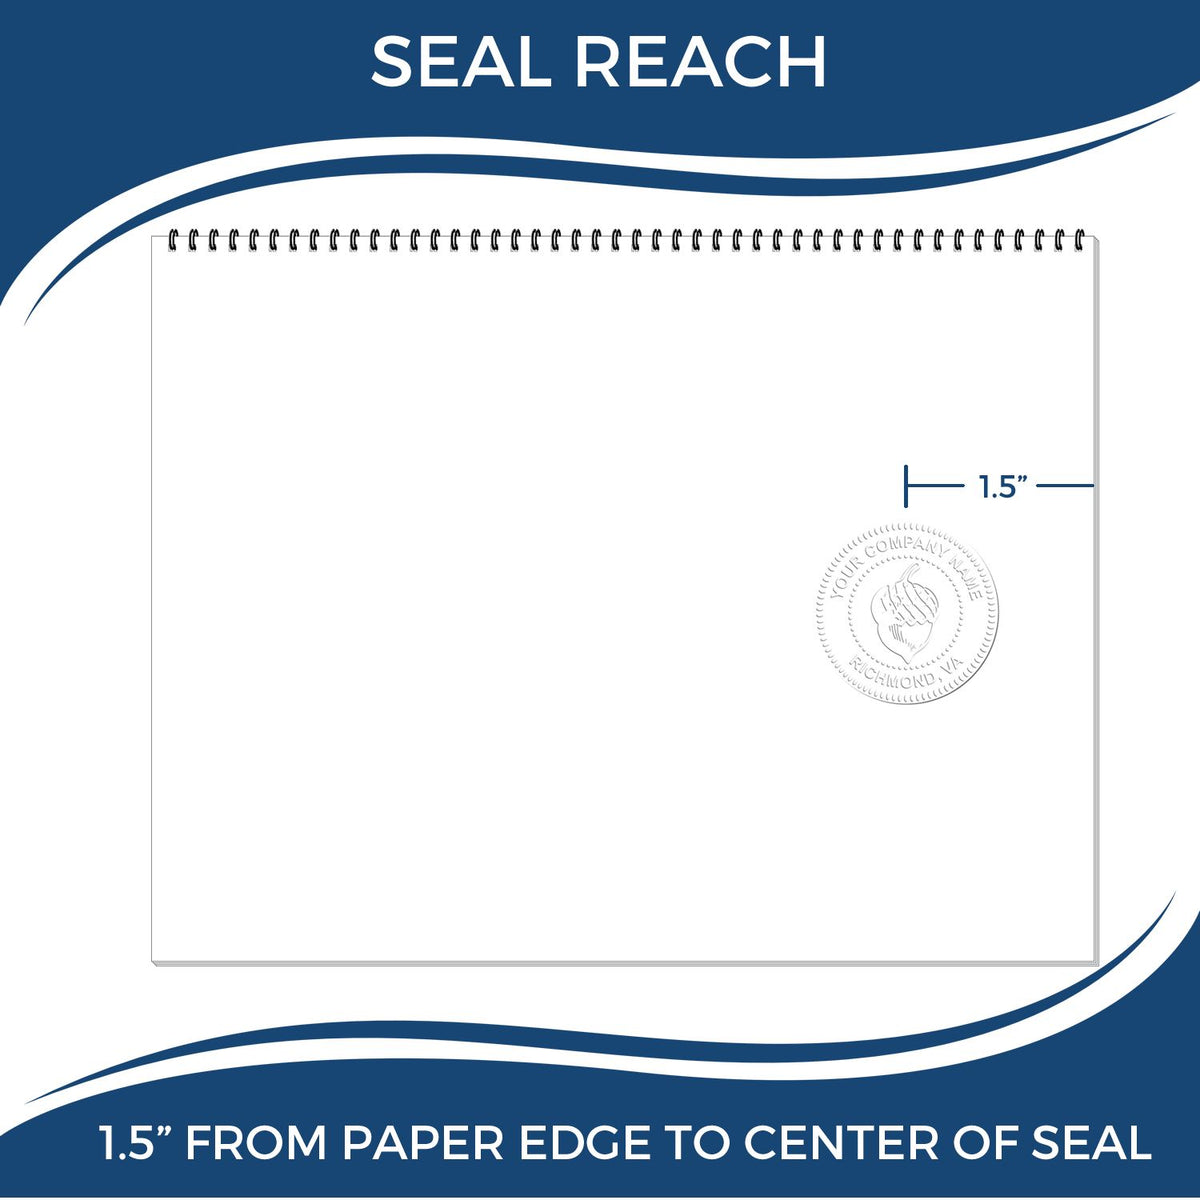 An infographic showing the seal reach which is represented by a ruler and a miniature seal image of the State of Massachusetts Soft Land Surveyor Embossing Seal